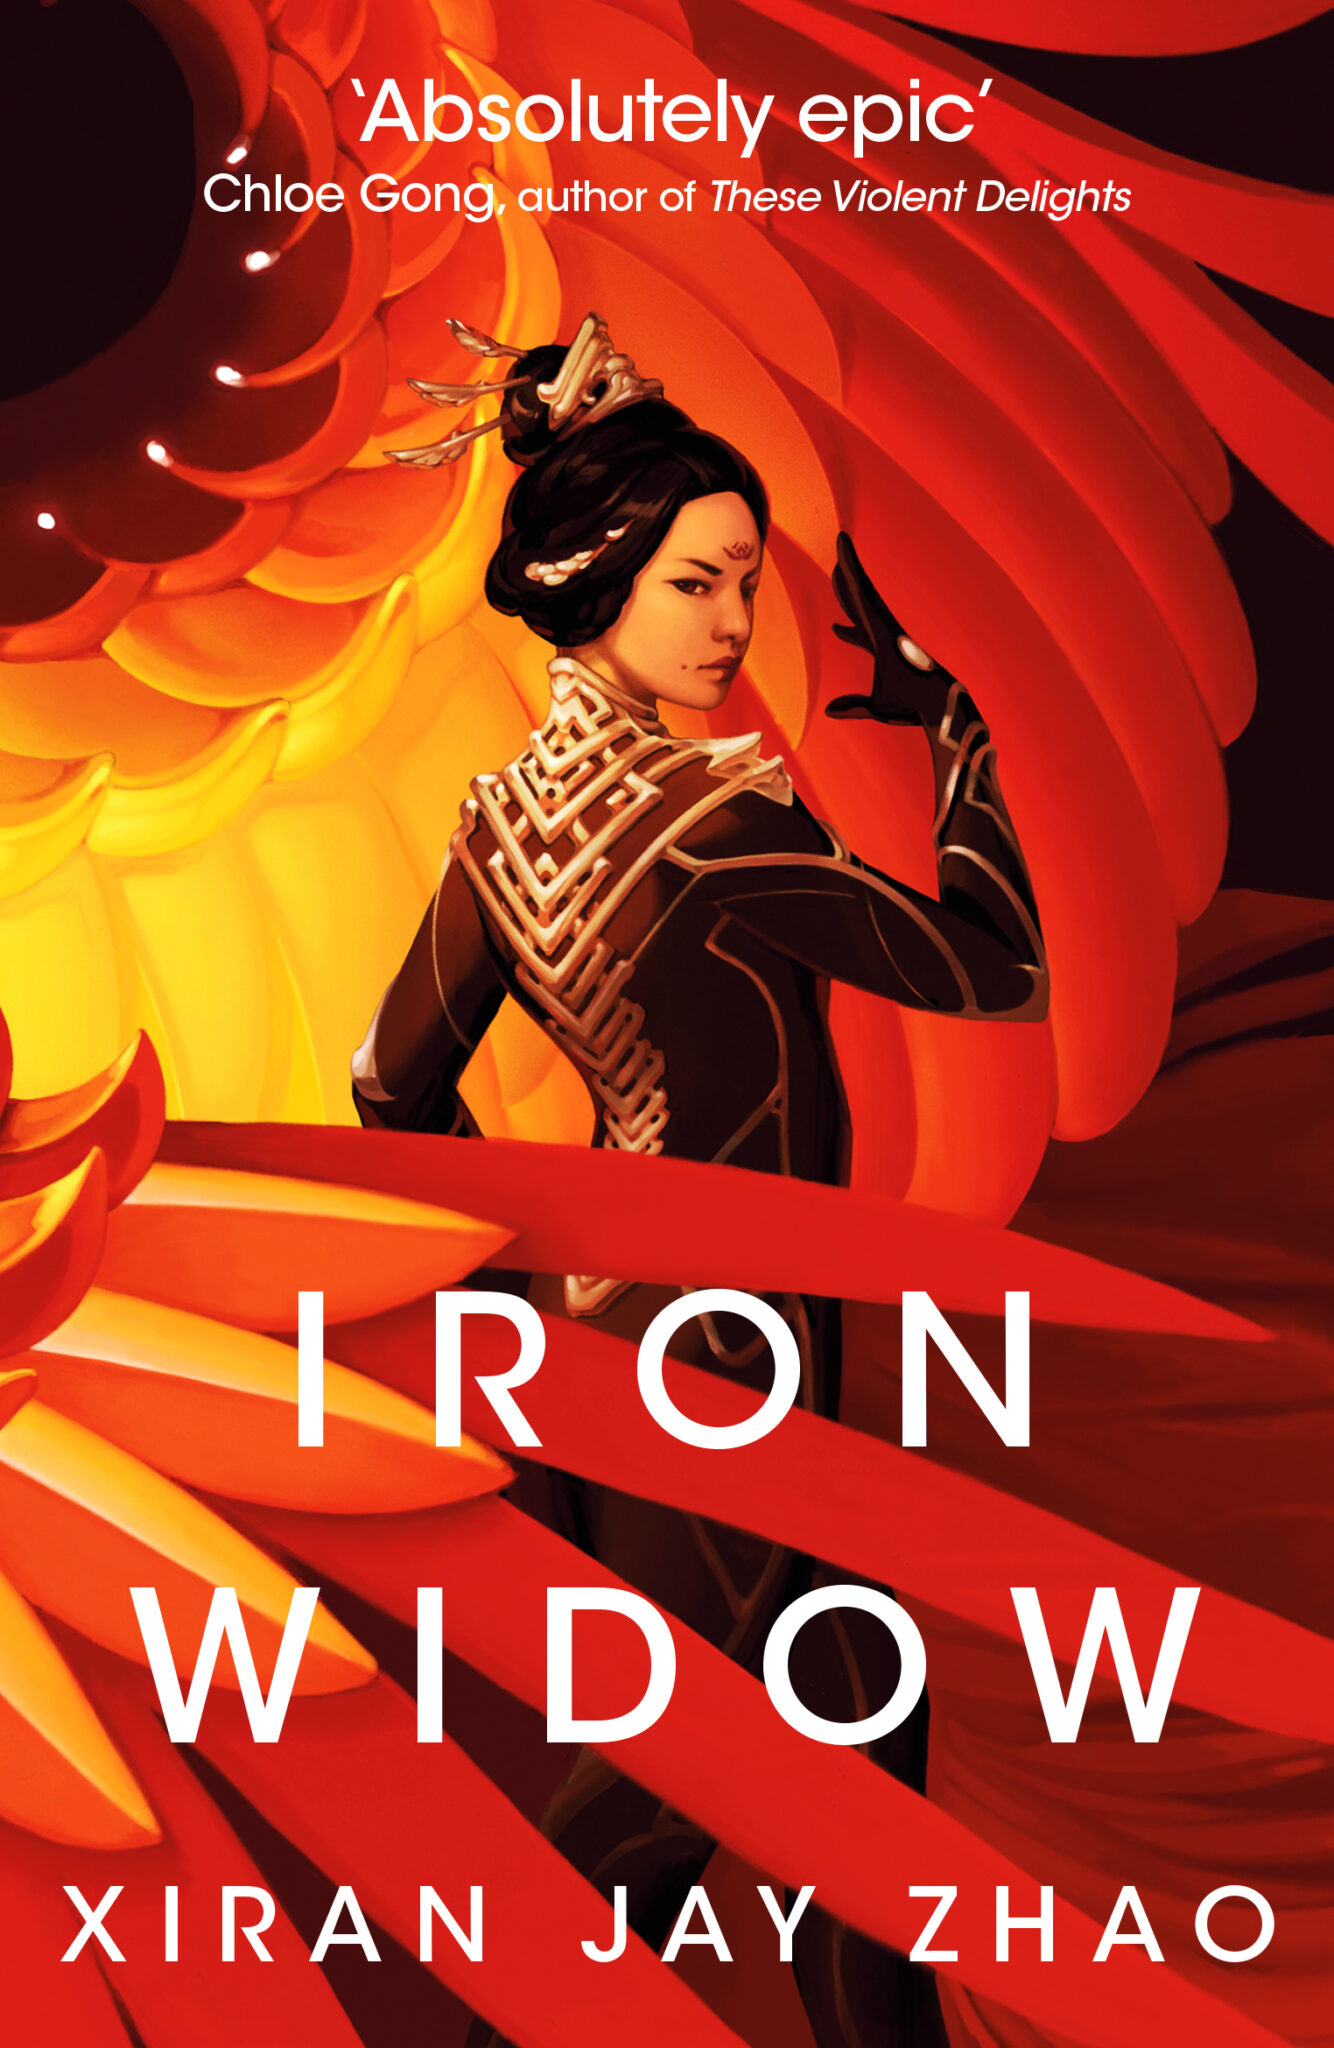 Cover of Iron Widow by Xiran Jay Zhao with a quote from fellow author Chloe Gong